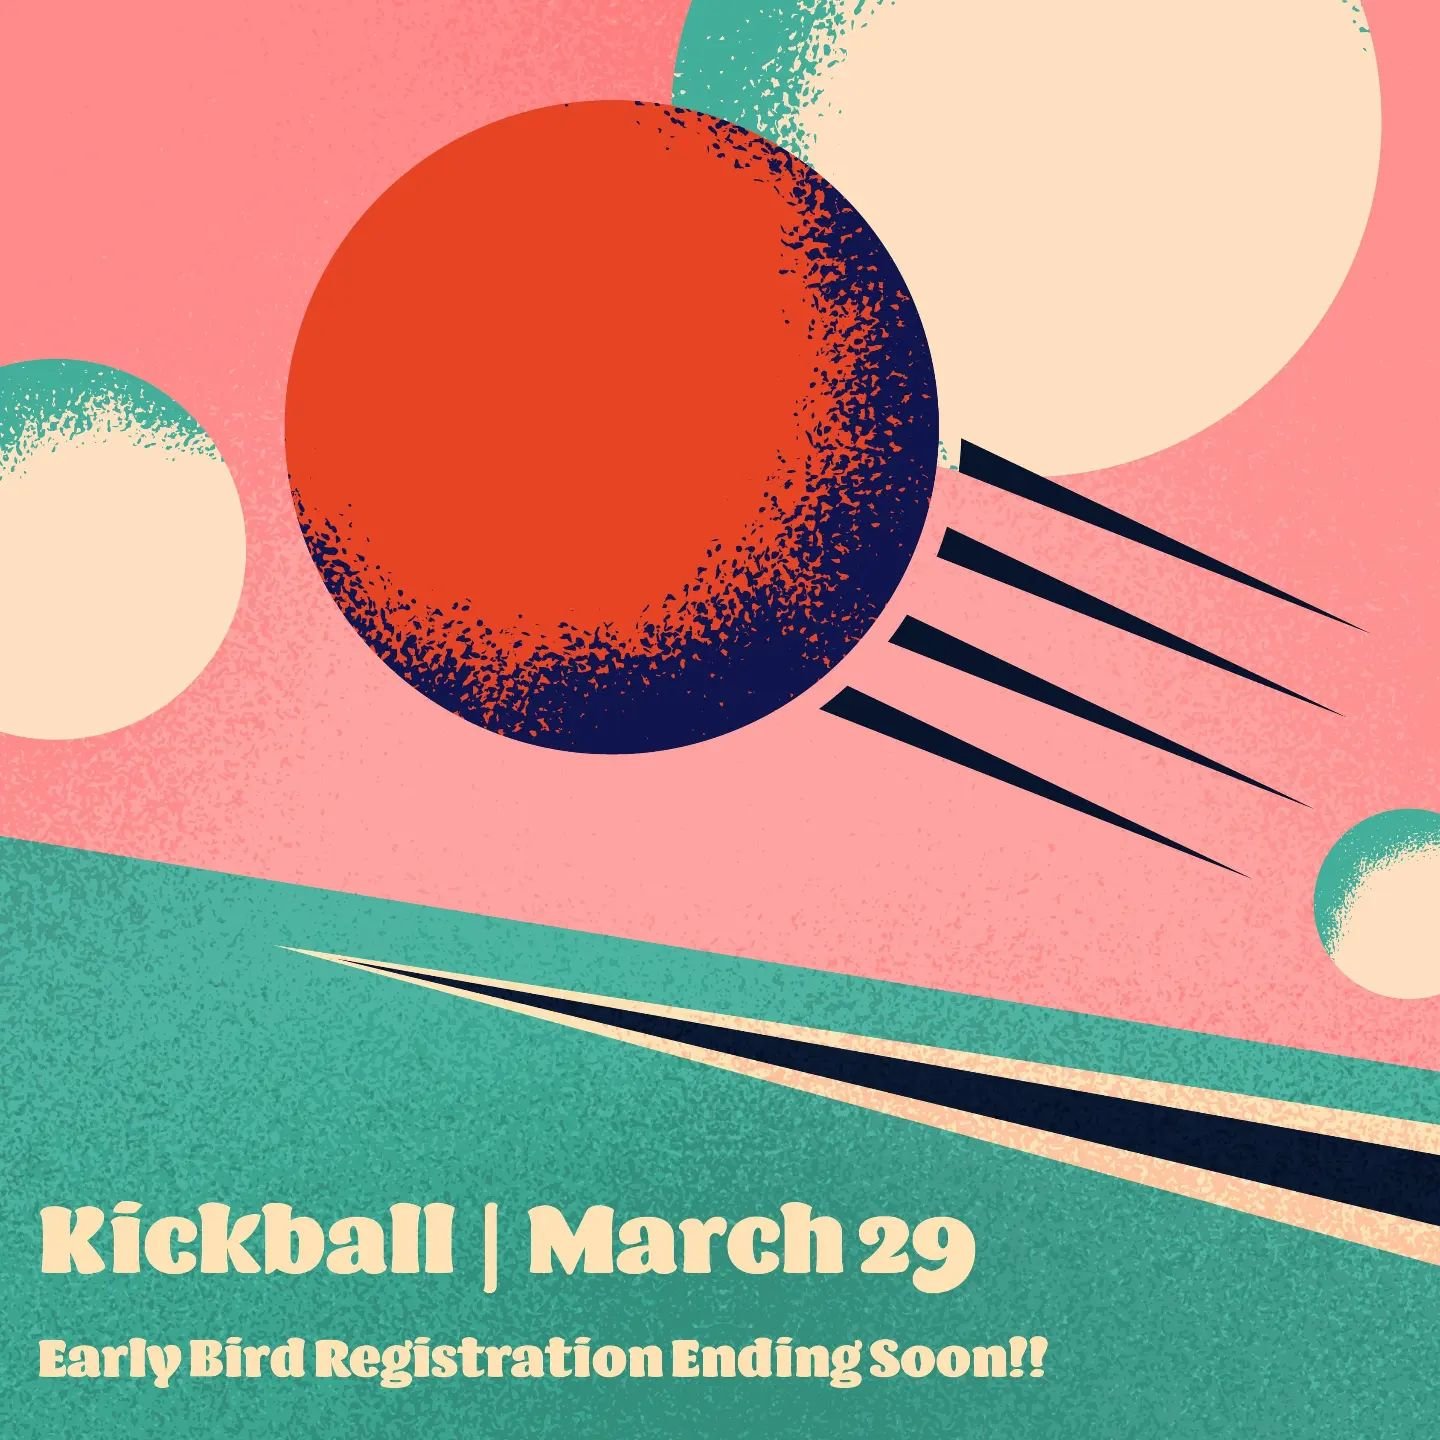 Early bird registration ending soon!!

Don't miss out on the early bird registration discount and join us for out spring 2024 kickball season! We hope to see you there!! 

https://outloudphilly.leagueapps.com/leagues